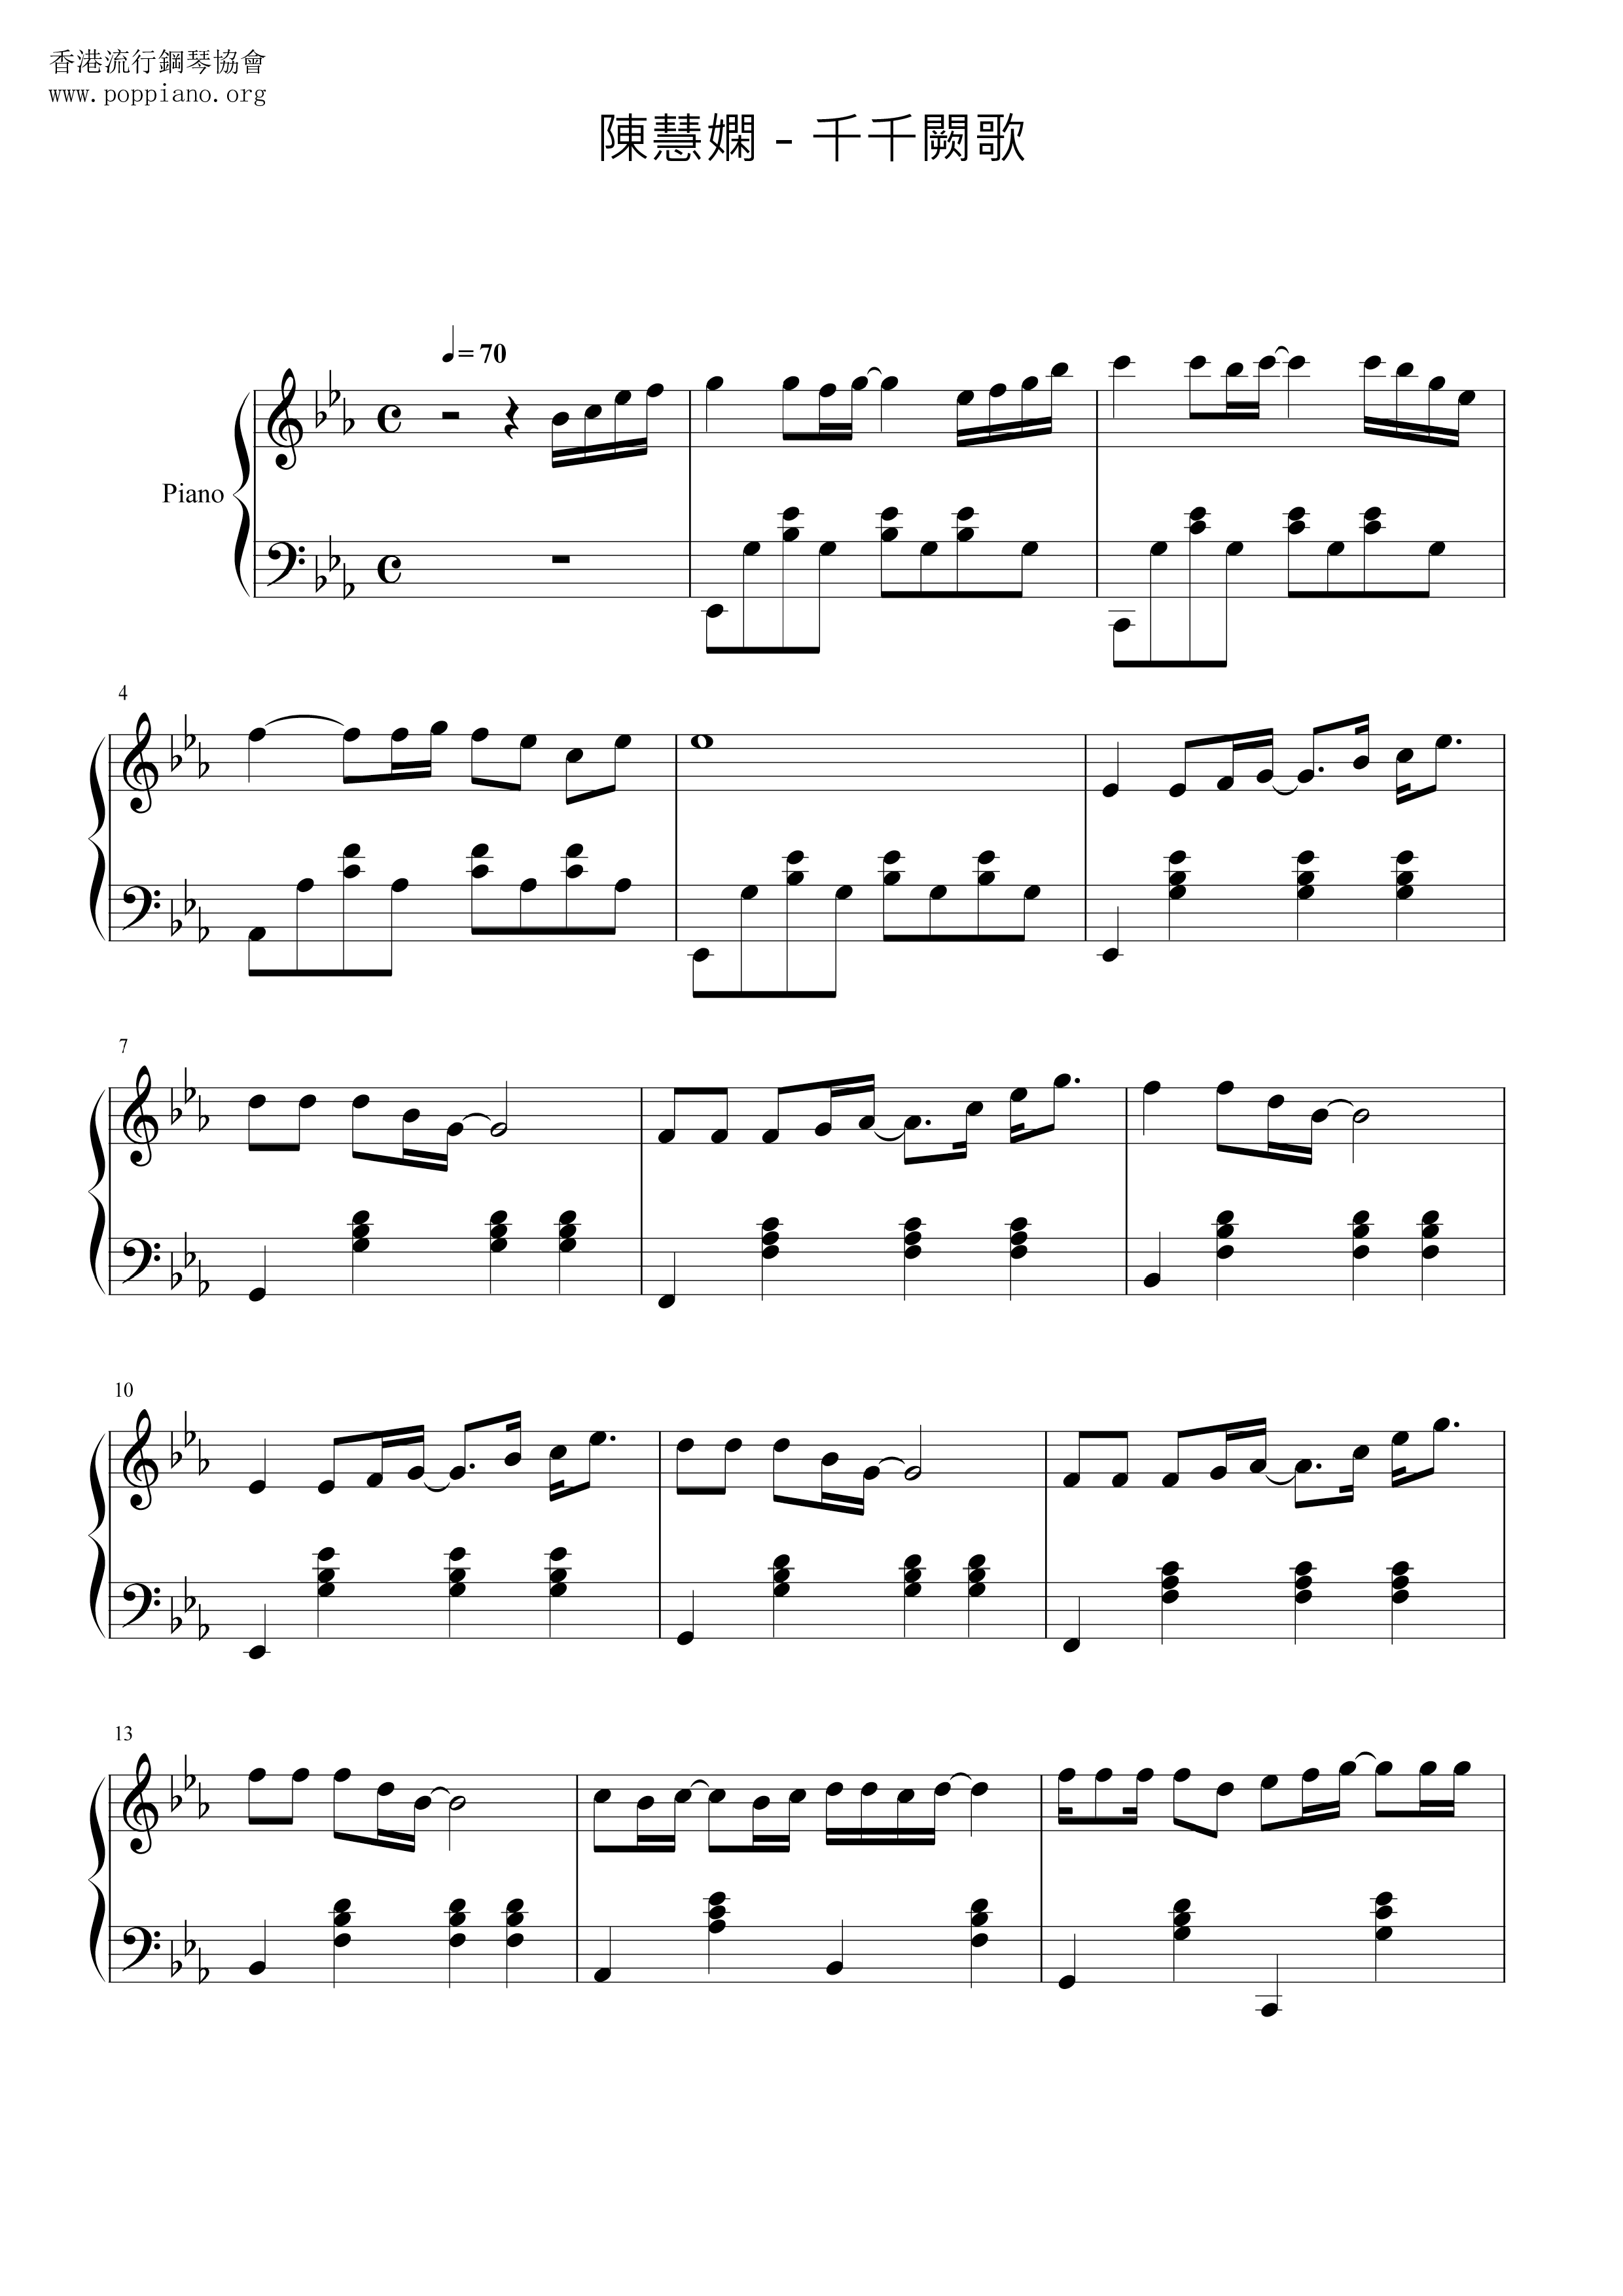 Of The Setting Sun Song Score